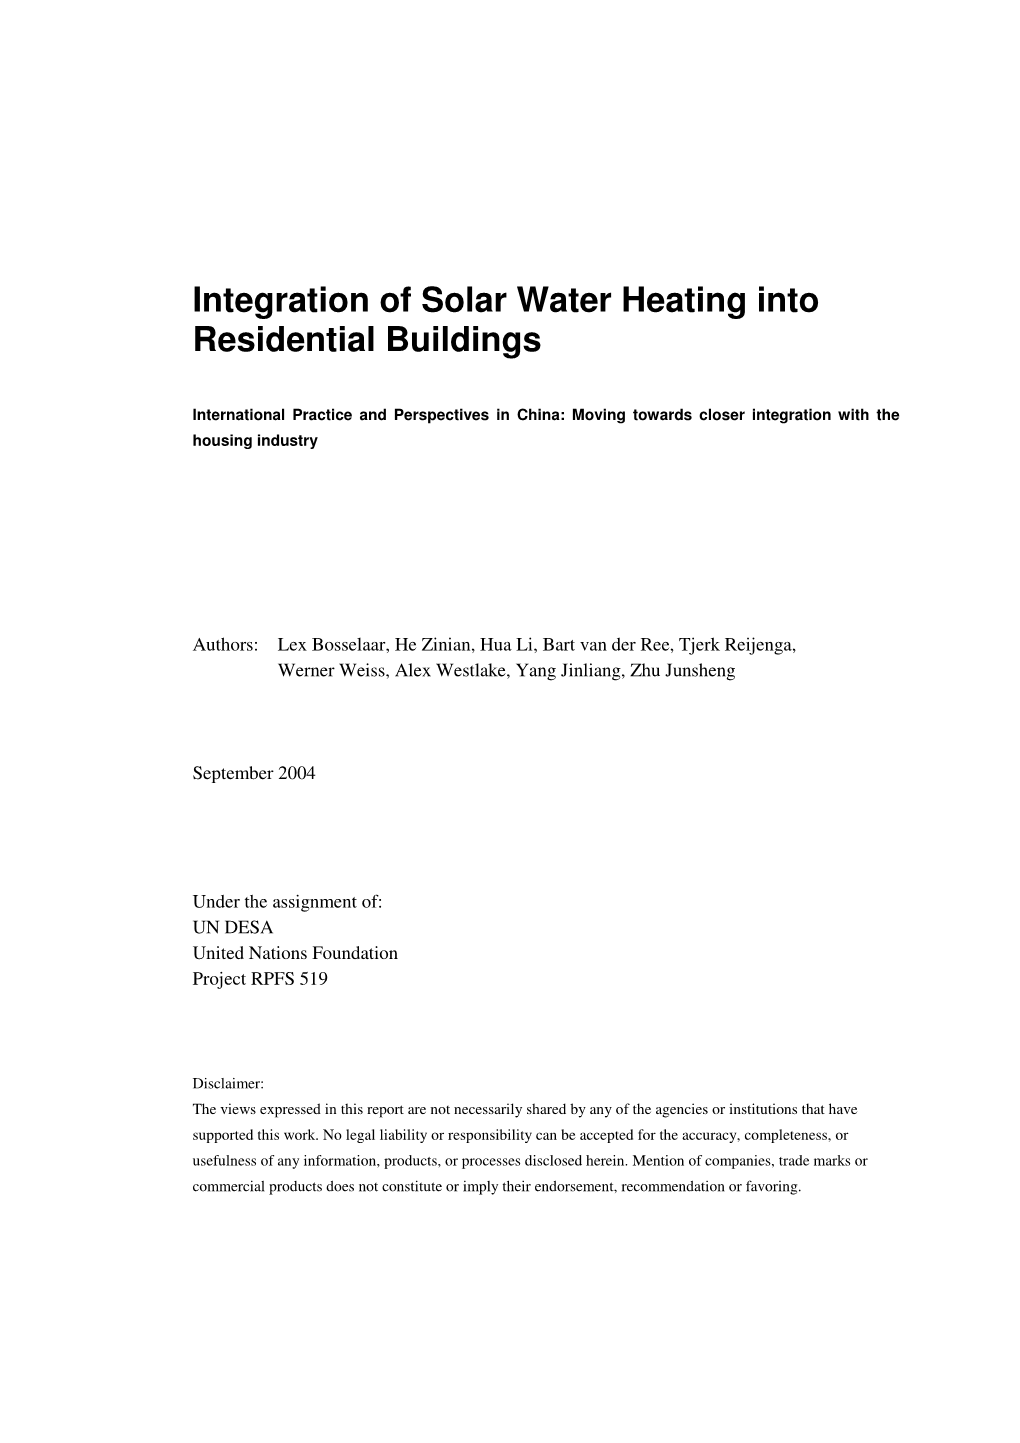 Integration of Solar Water Heating Into Residential Buildings